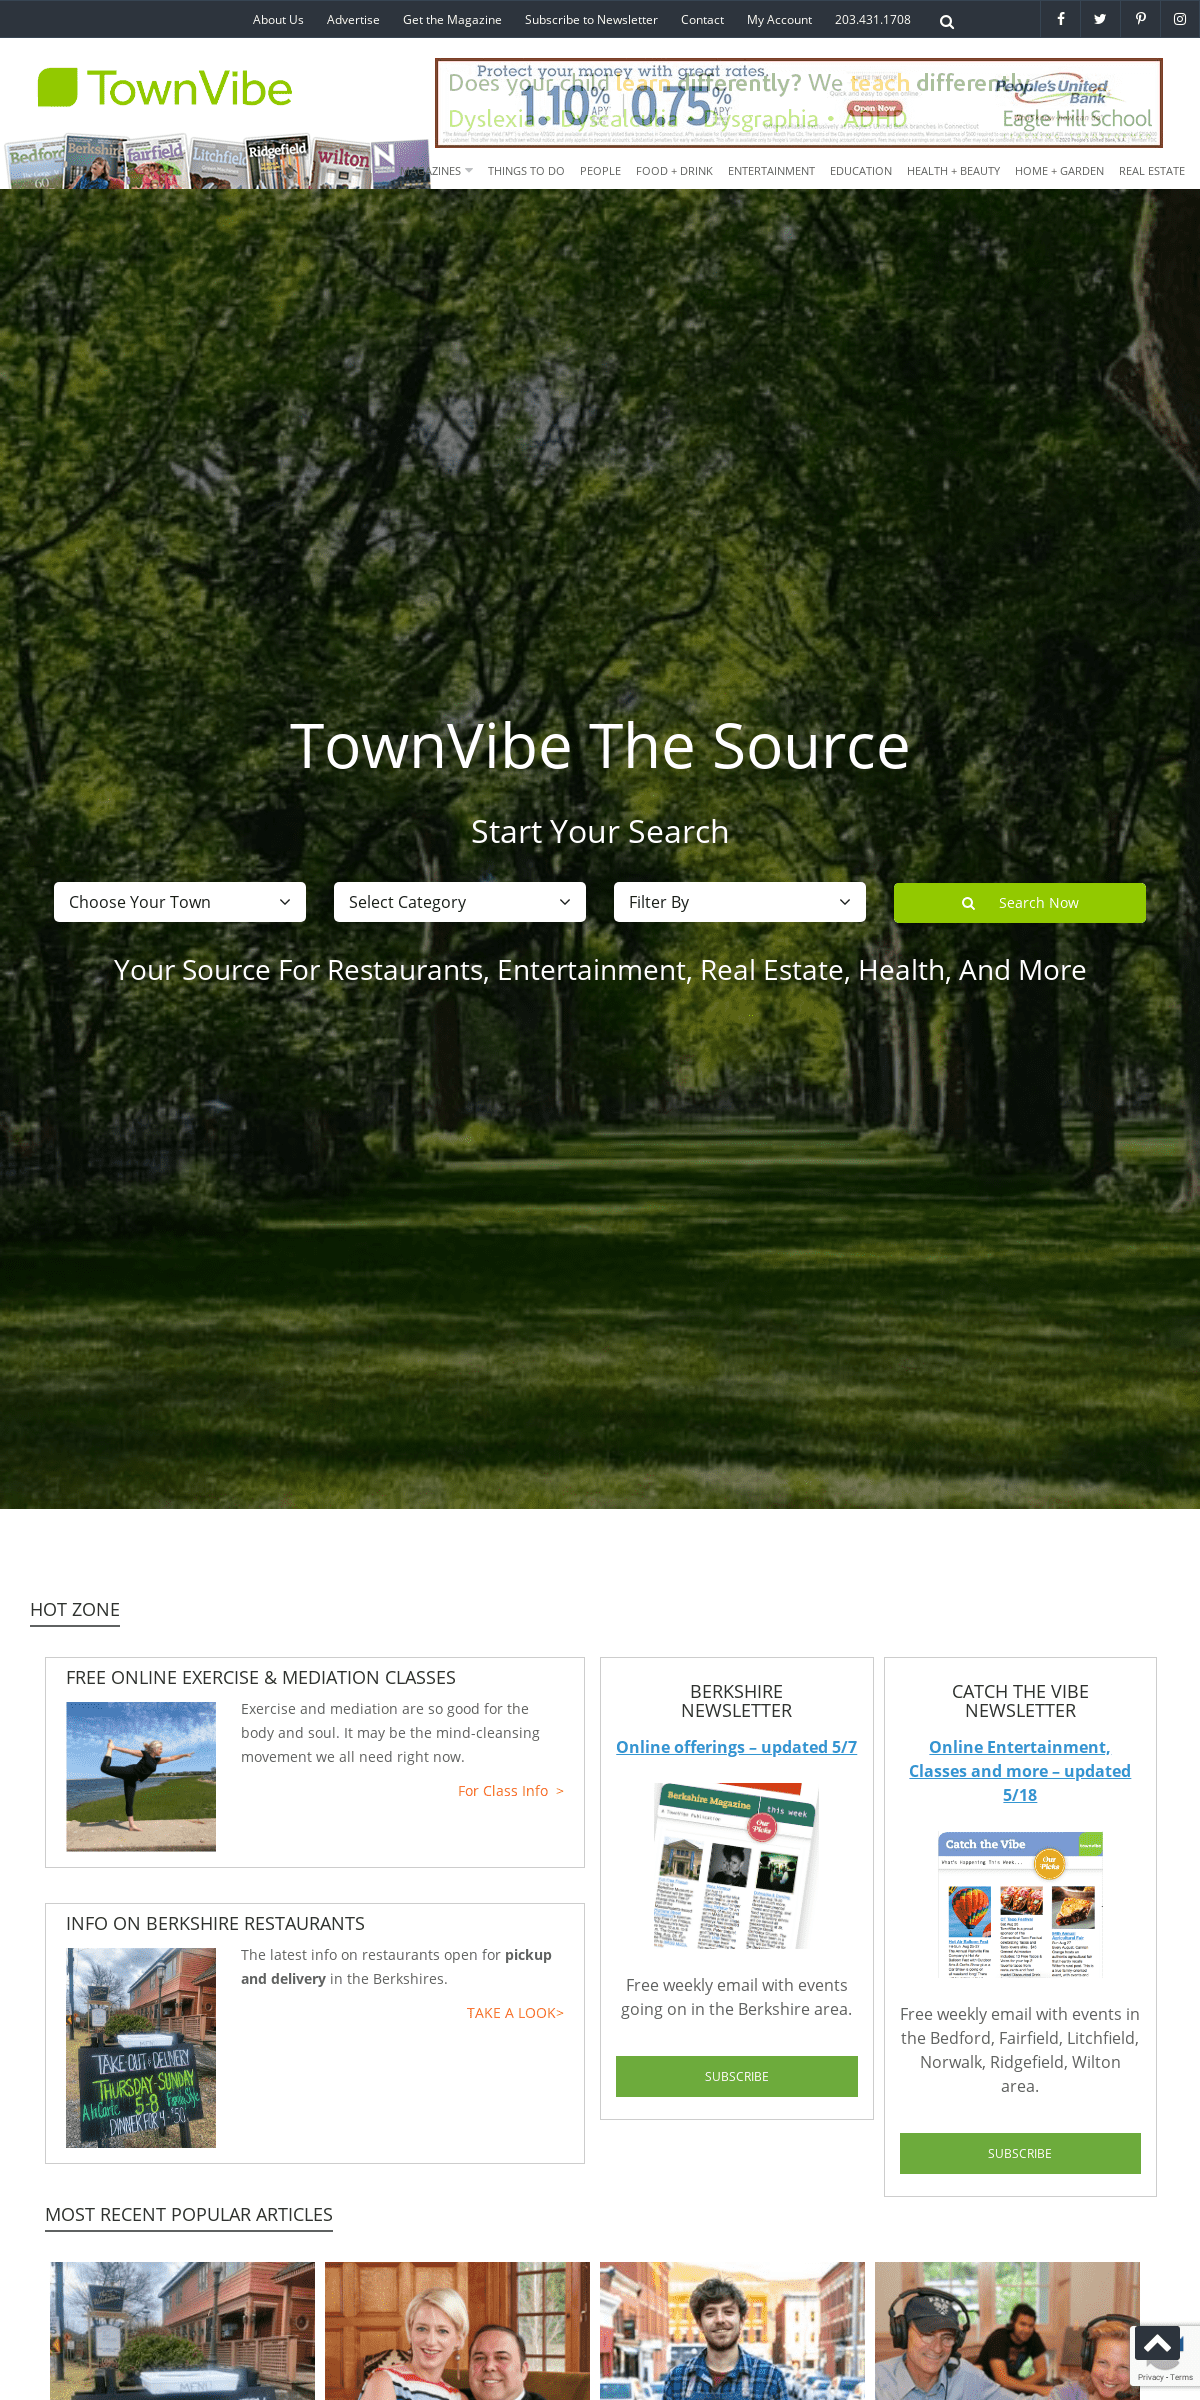 A complete backup of townvibe.com